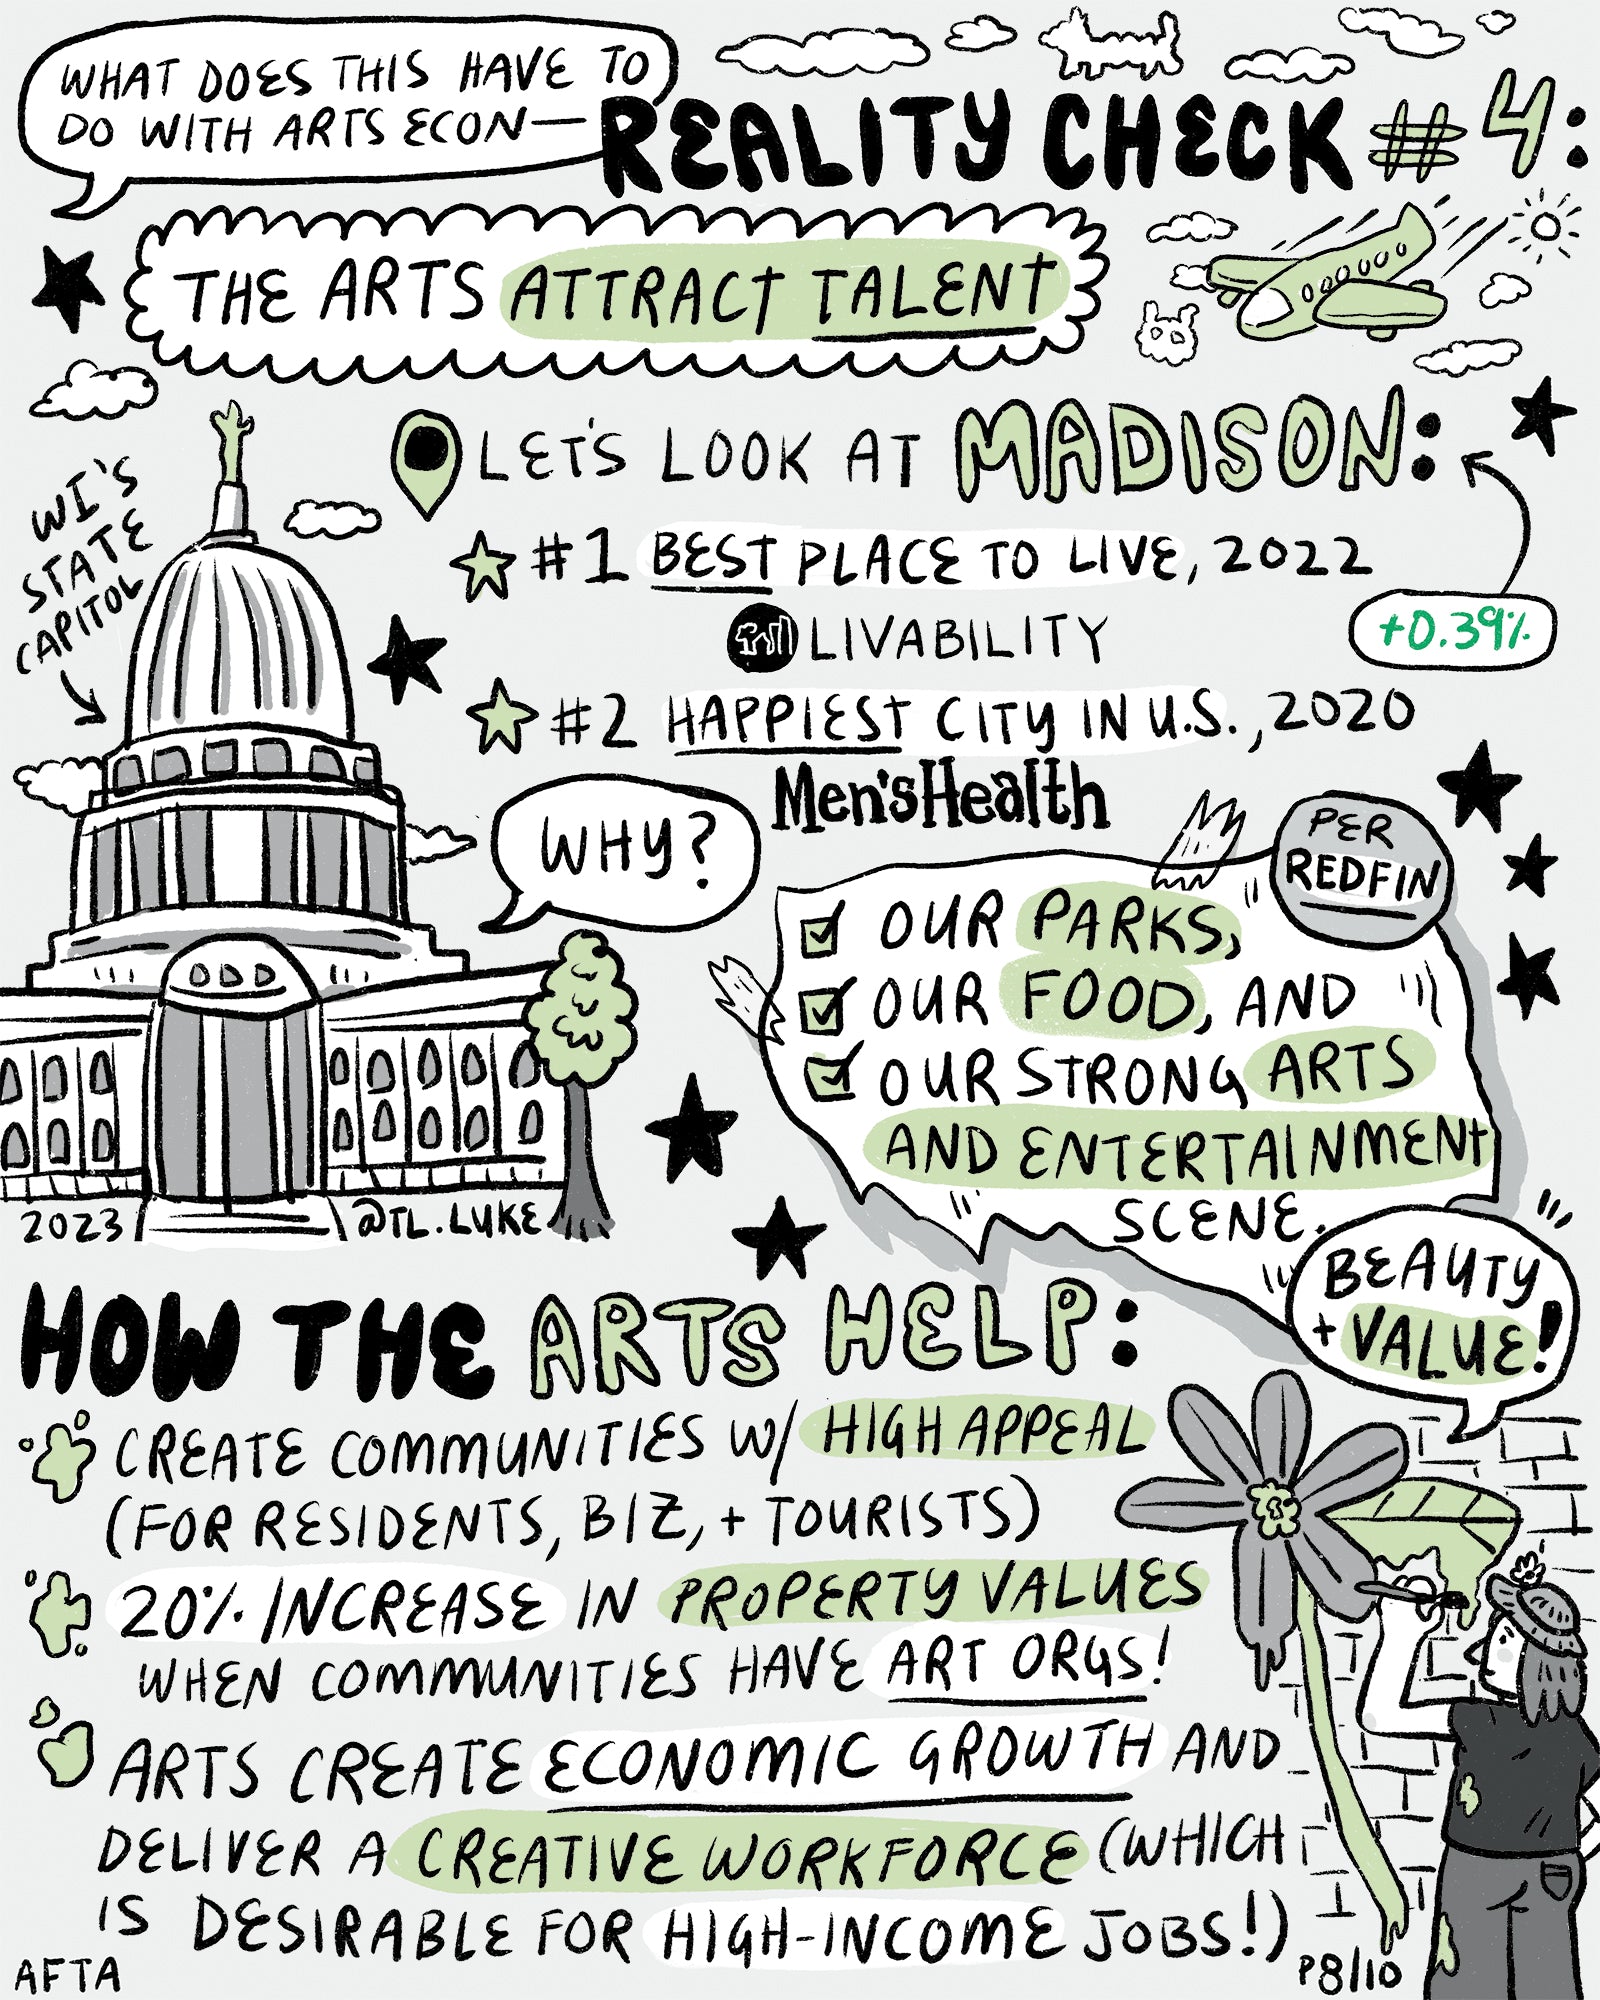 Page 8 of Auntie Luke's Art Economy Guide, explains how the arts attract talent and positively influences migration.